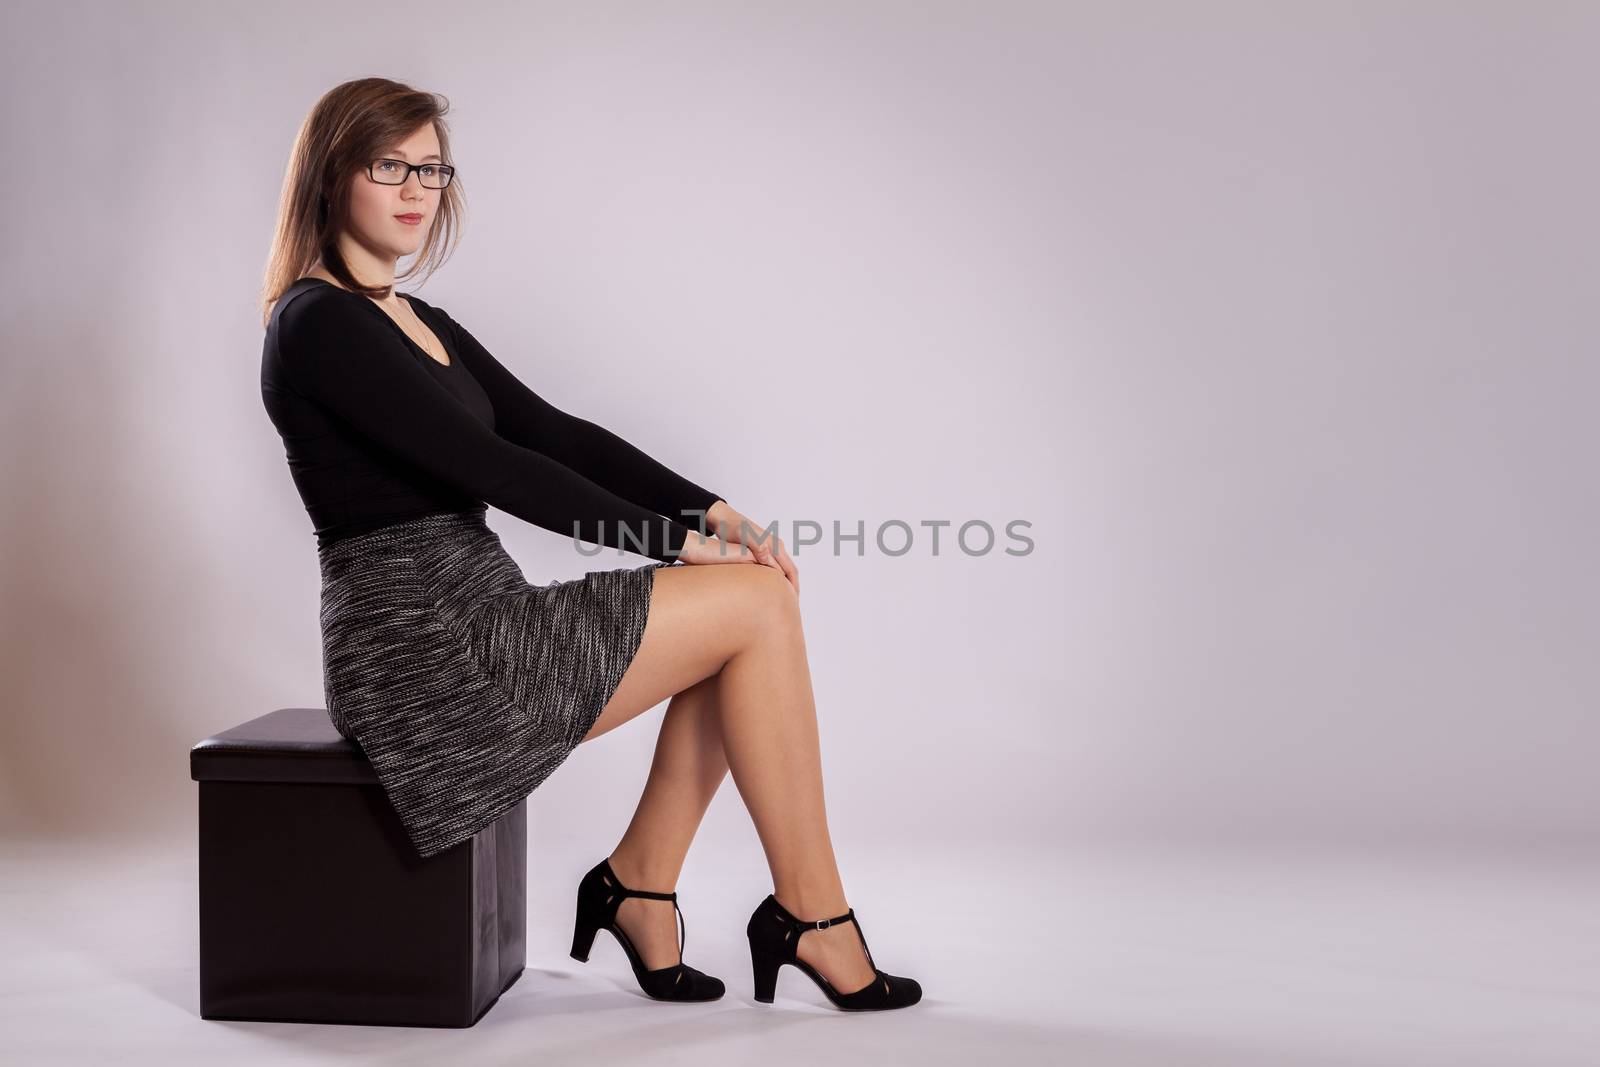 A young girl is sitting on a stool